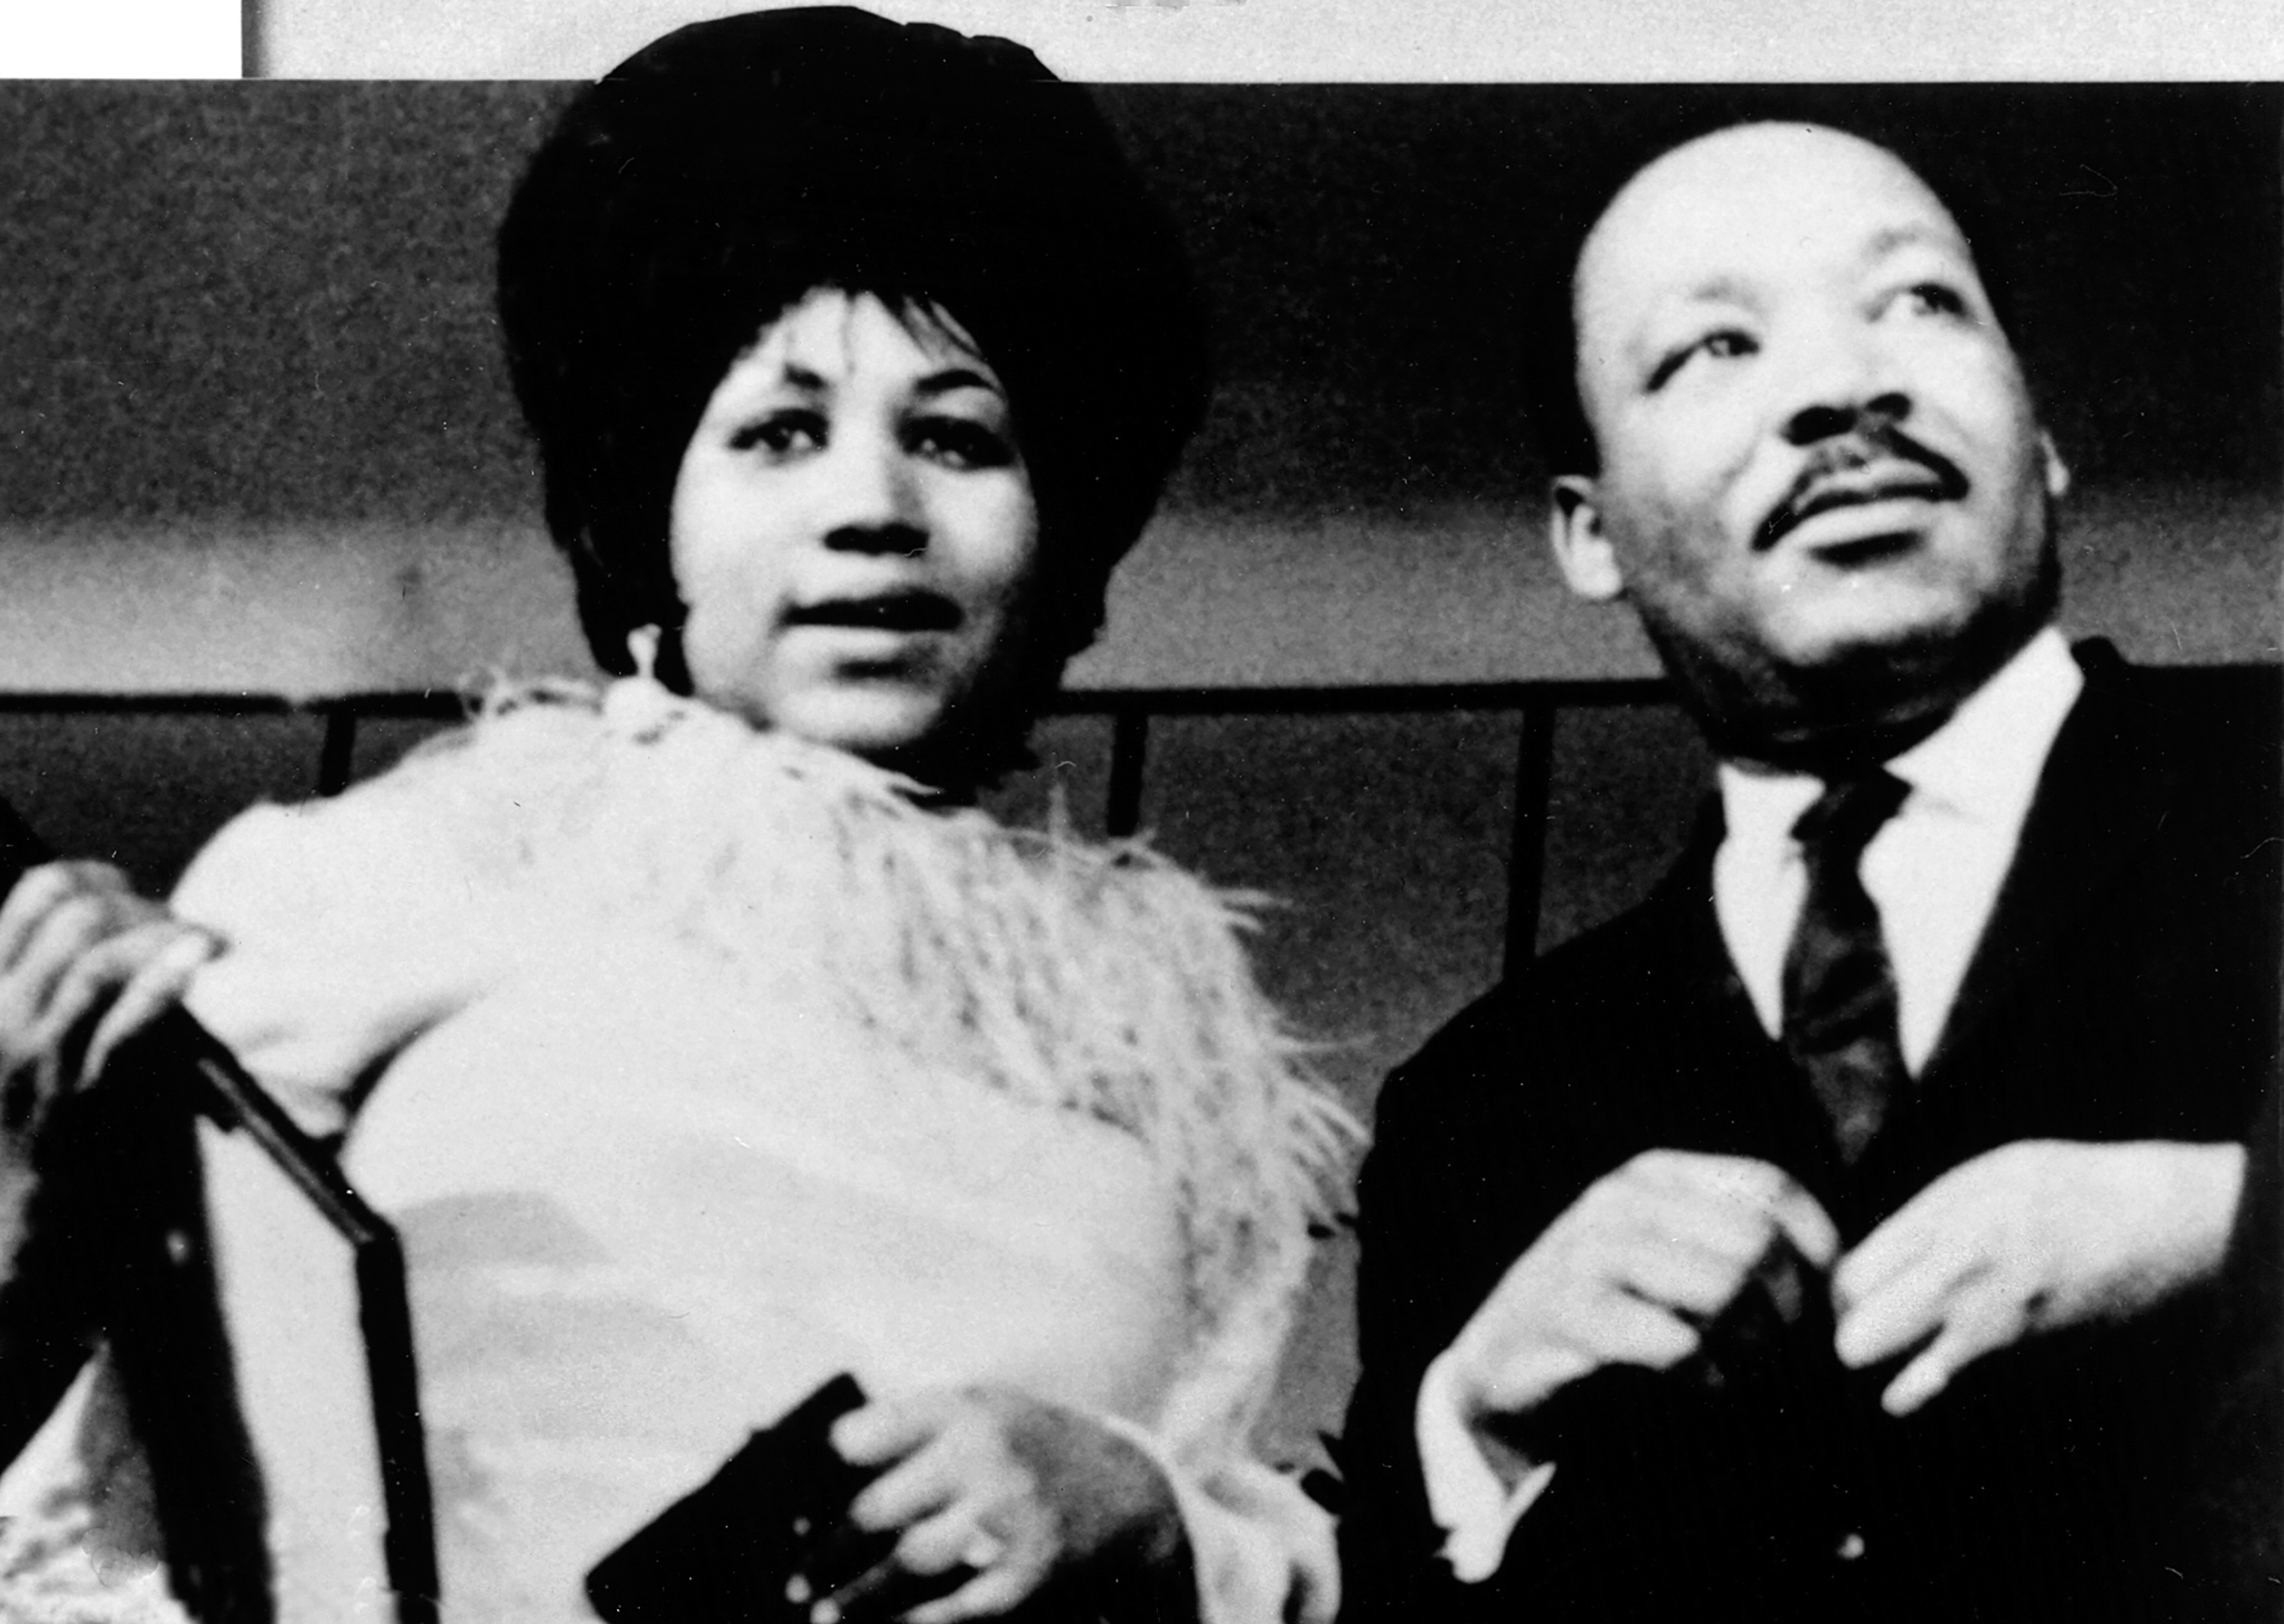 Aretha Franklin and Dr. Martin Luther King Jr. in the late 1960s. (Everett Collection)